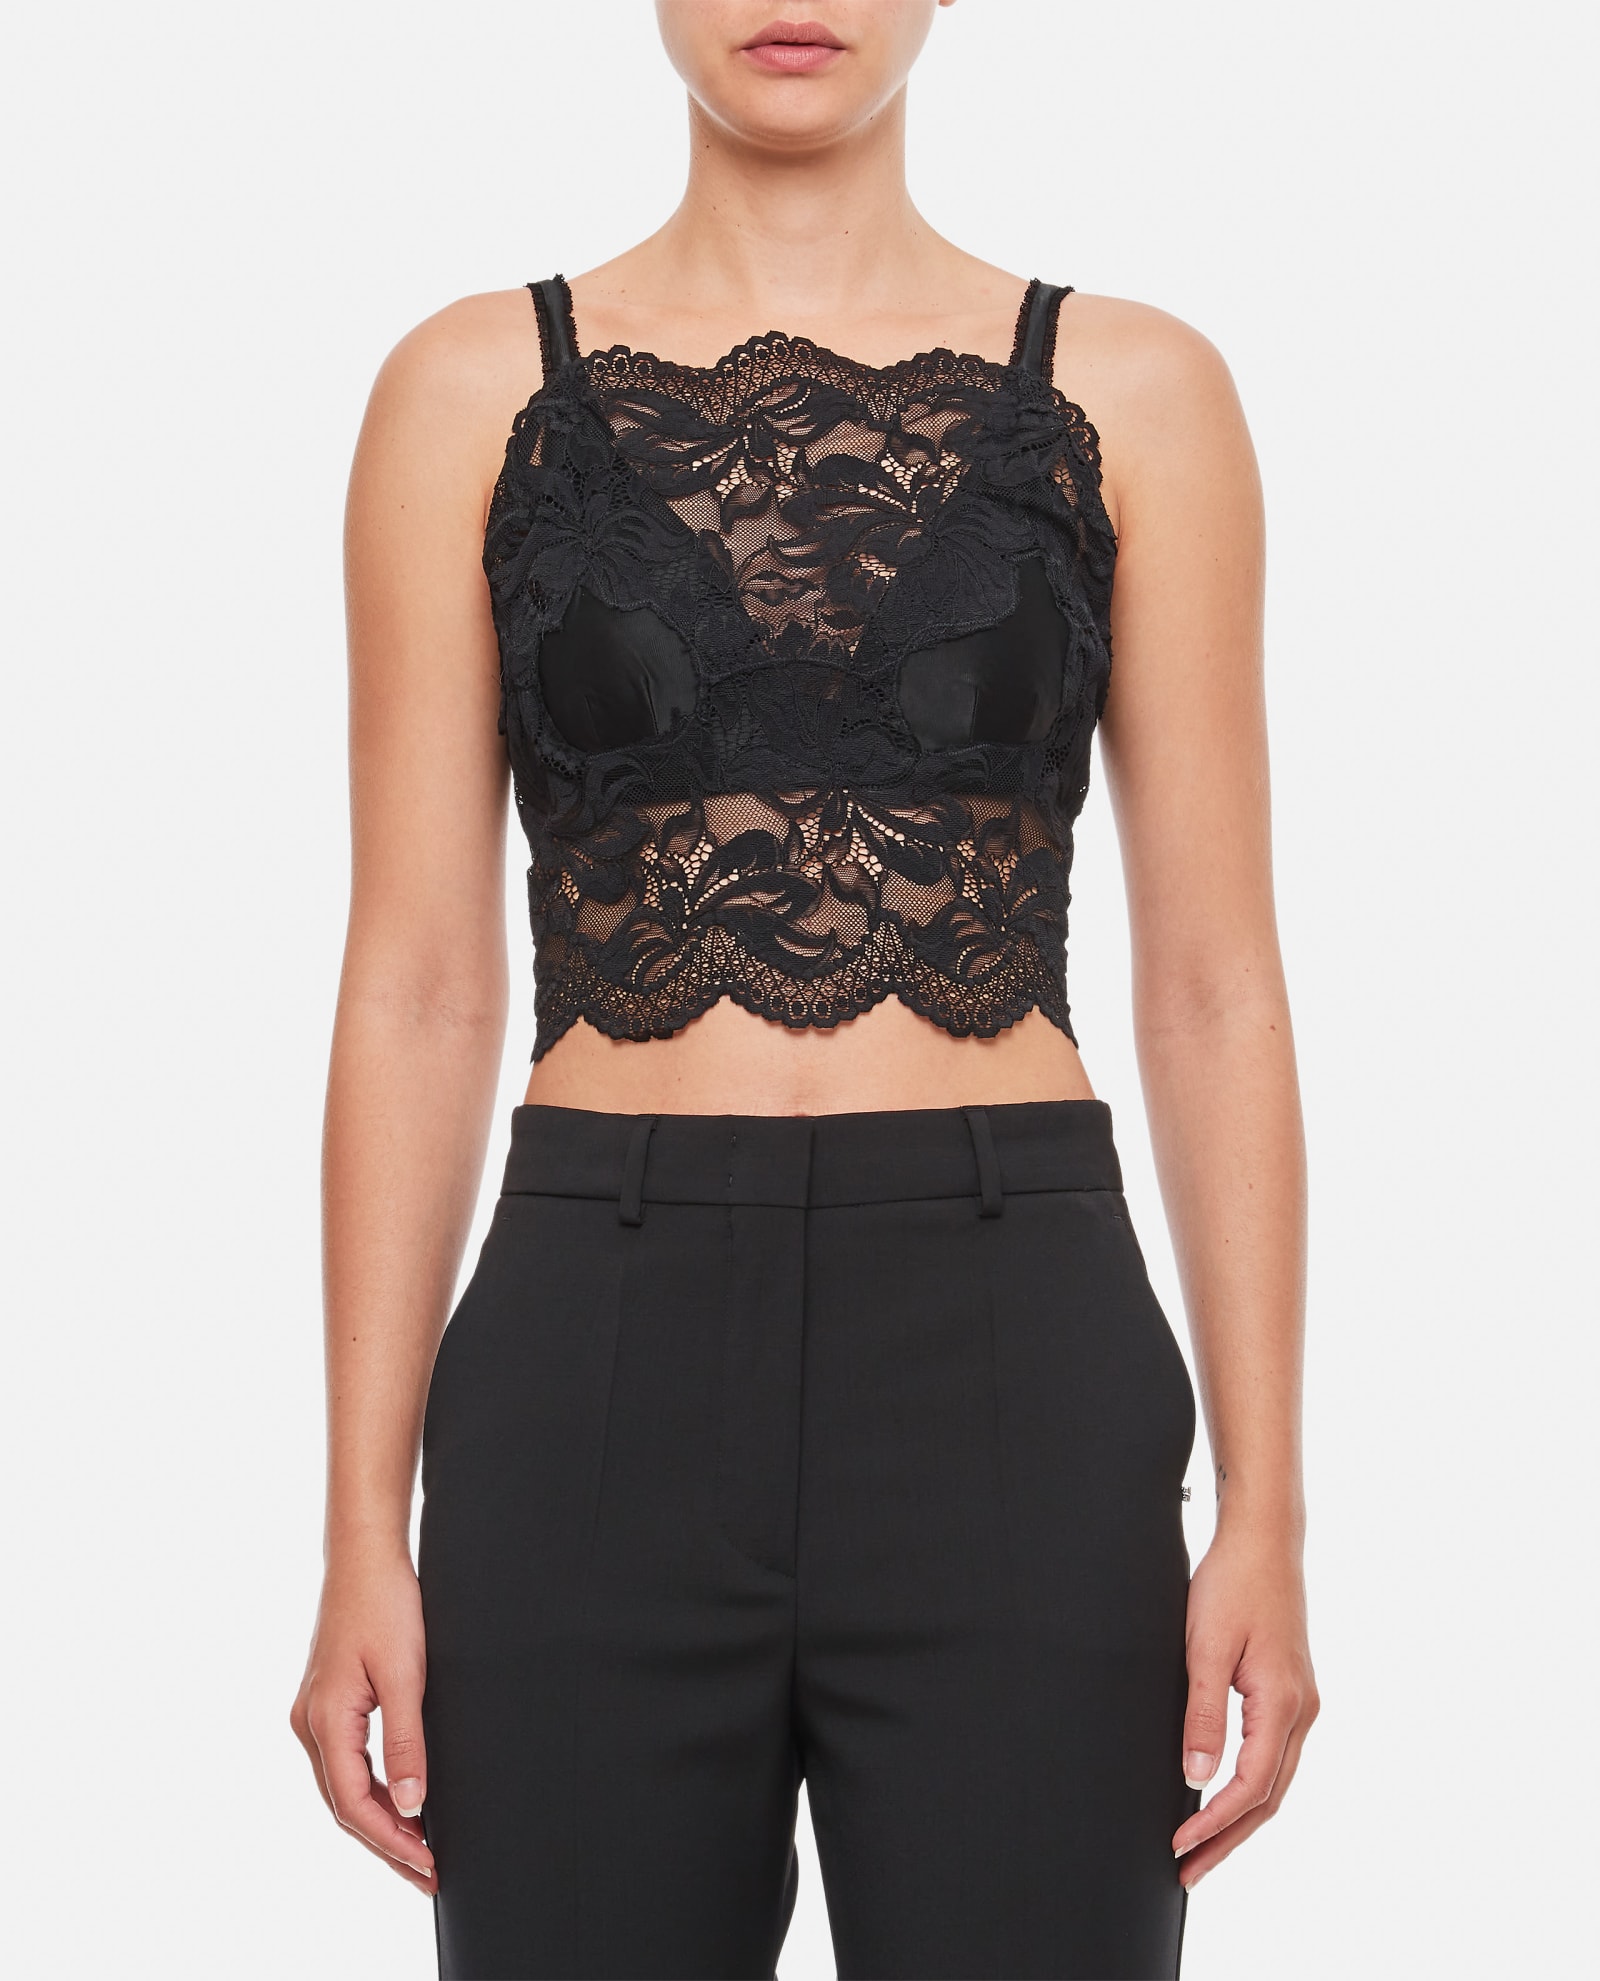 PACO RABANNE LACE CROP TOP